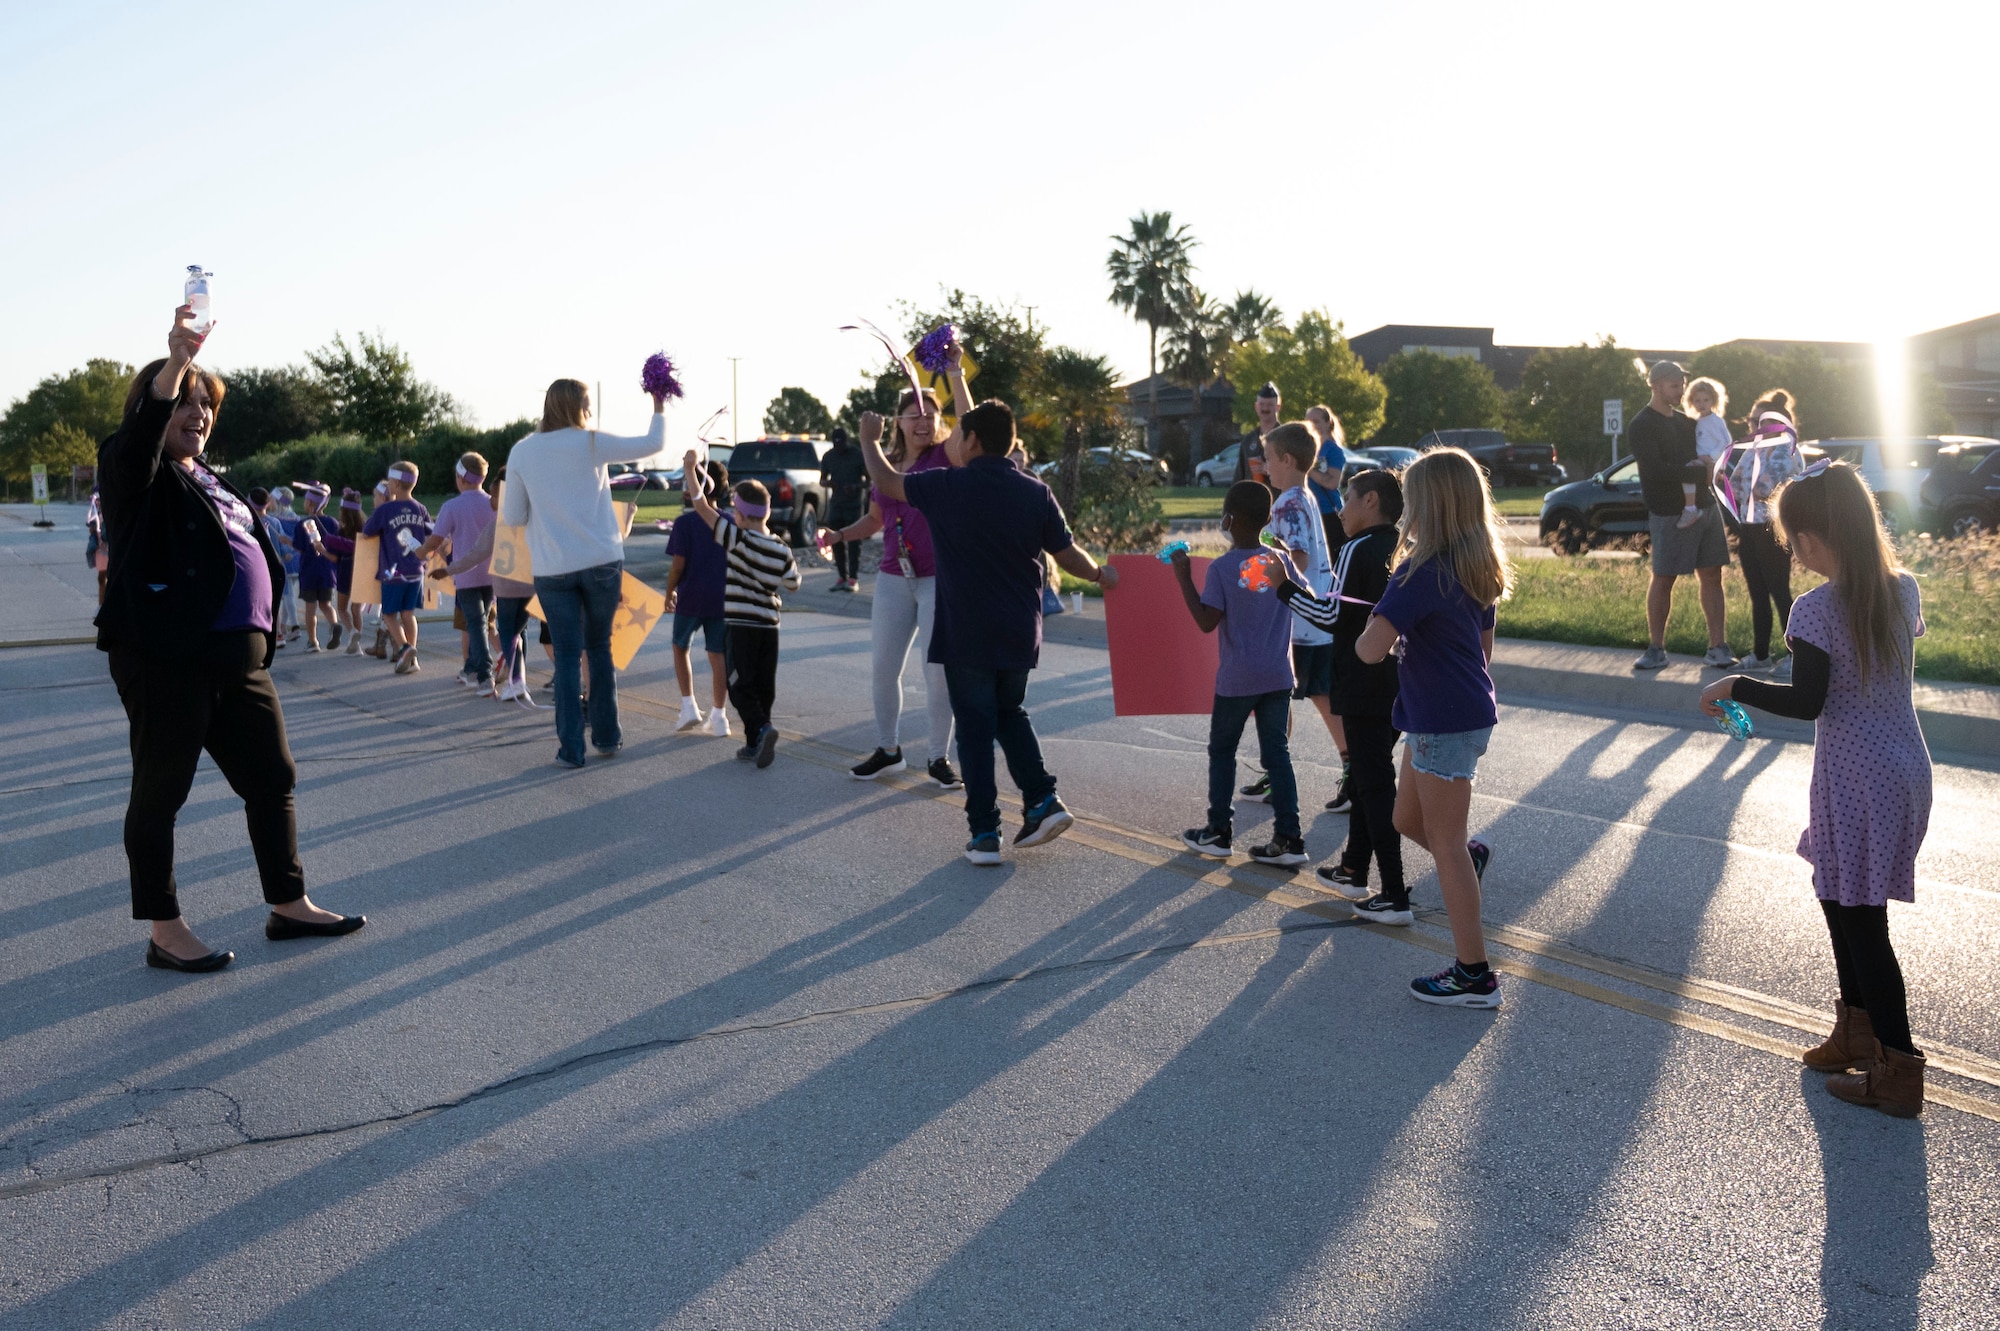 Students and staﬀ from the Roberto Bobby Barrera (RBB) Elementary School walk the “Purple Parade” held at Laughlin Air Force Base, Texas, Sept. 29, 2022. The “Purple Parade” was held in celebration of RBB Elementary School receiving the Purple Star Award, recognizing the support and commitment the school provides to meeting the unique needs of military-connected students and their families. (U.S. Air Force photo by Airman 1st Class Kailee Reynolds)